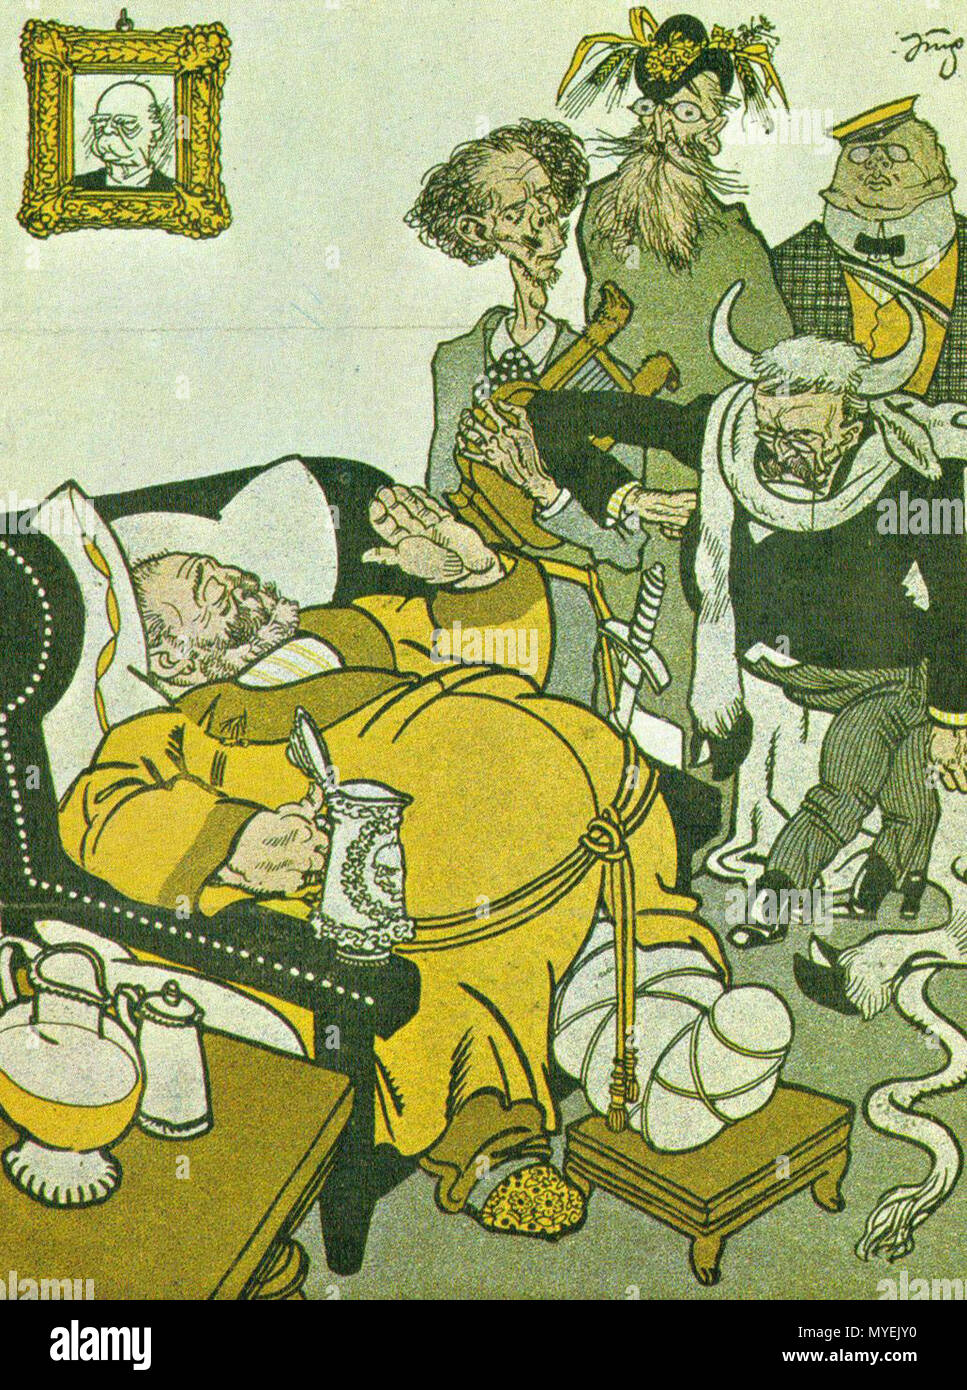 . Austrian politician Georg Schoenerer was sentenced to prison because in 1888 he conducted a raid on a newspaper office that had prematurely published the death notice of Kaiser Willhelm I. While doing so, he was drunk, and thus this political cartoon responds to his situation. . This file is lacking author information. 206 Georg Schoenerer Stock Photo